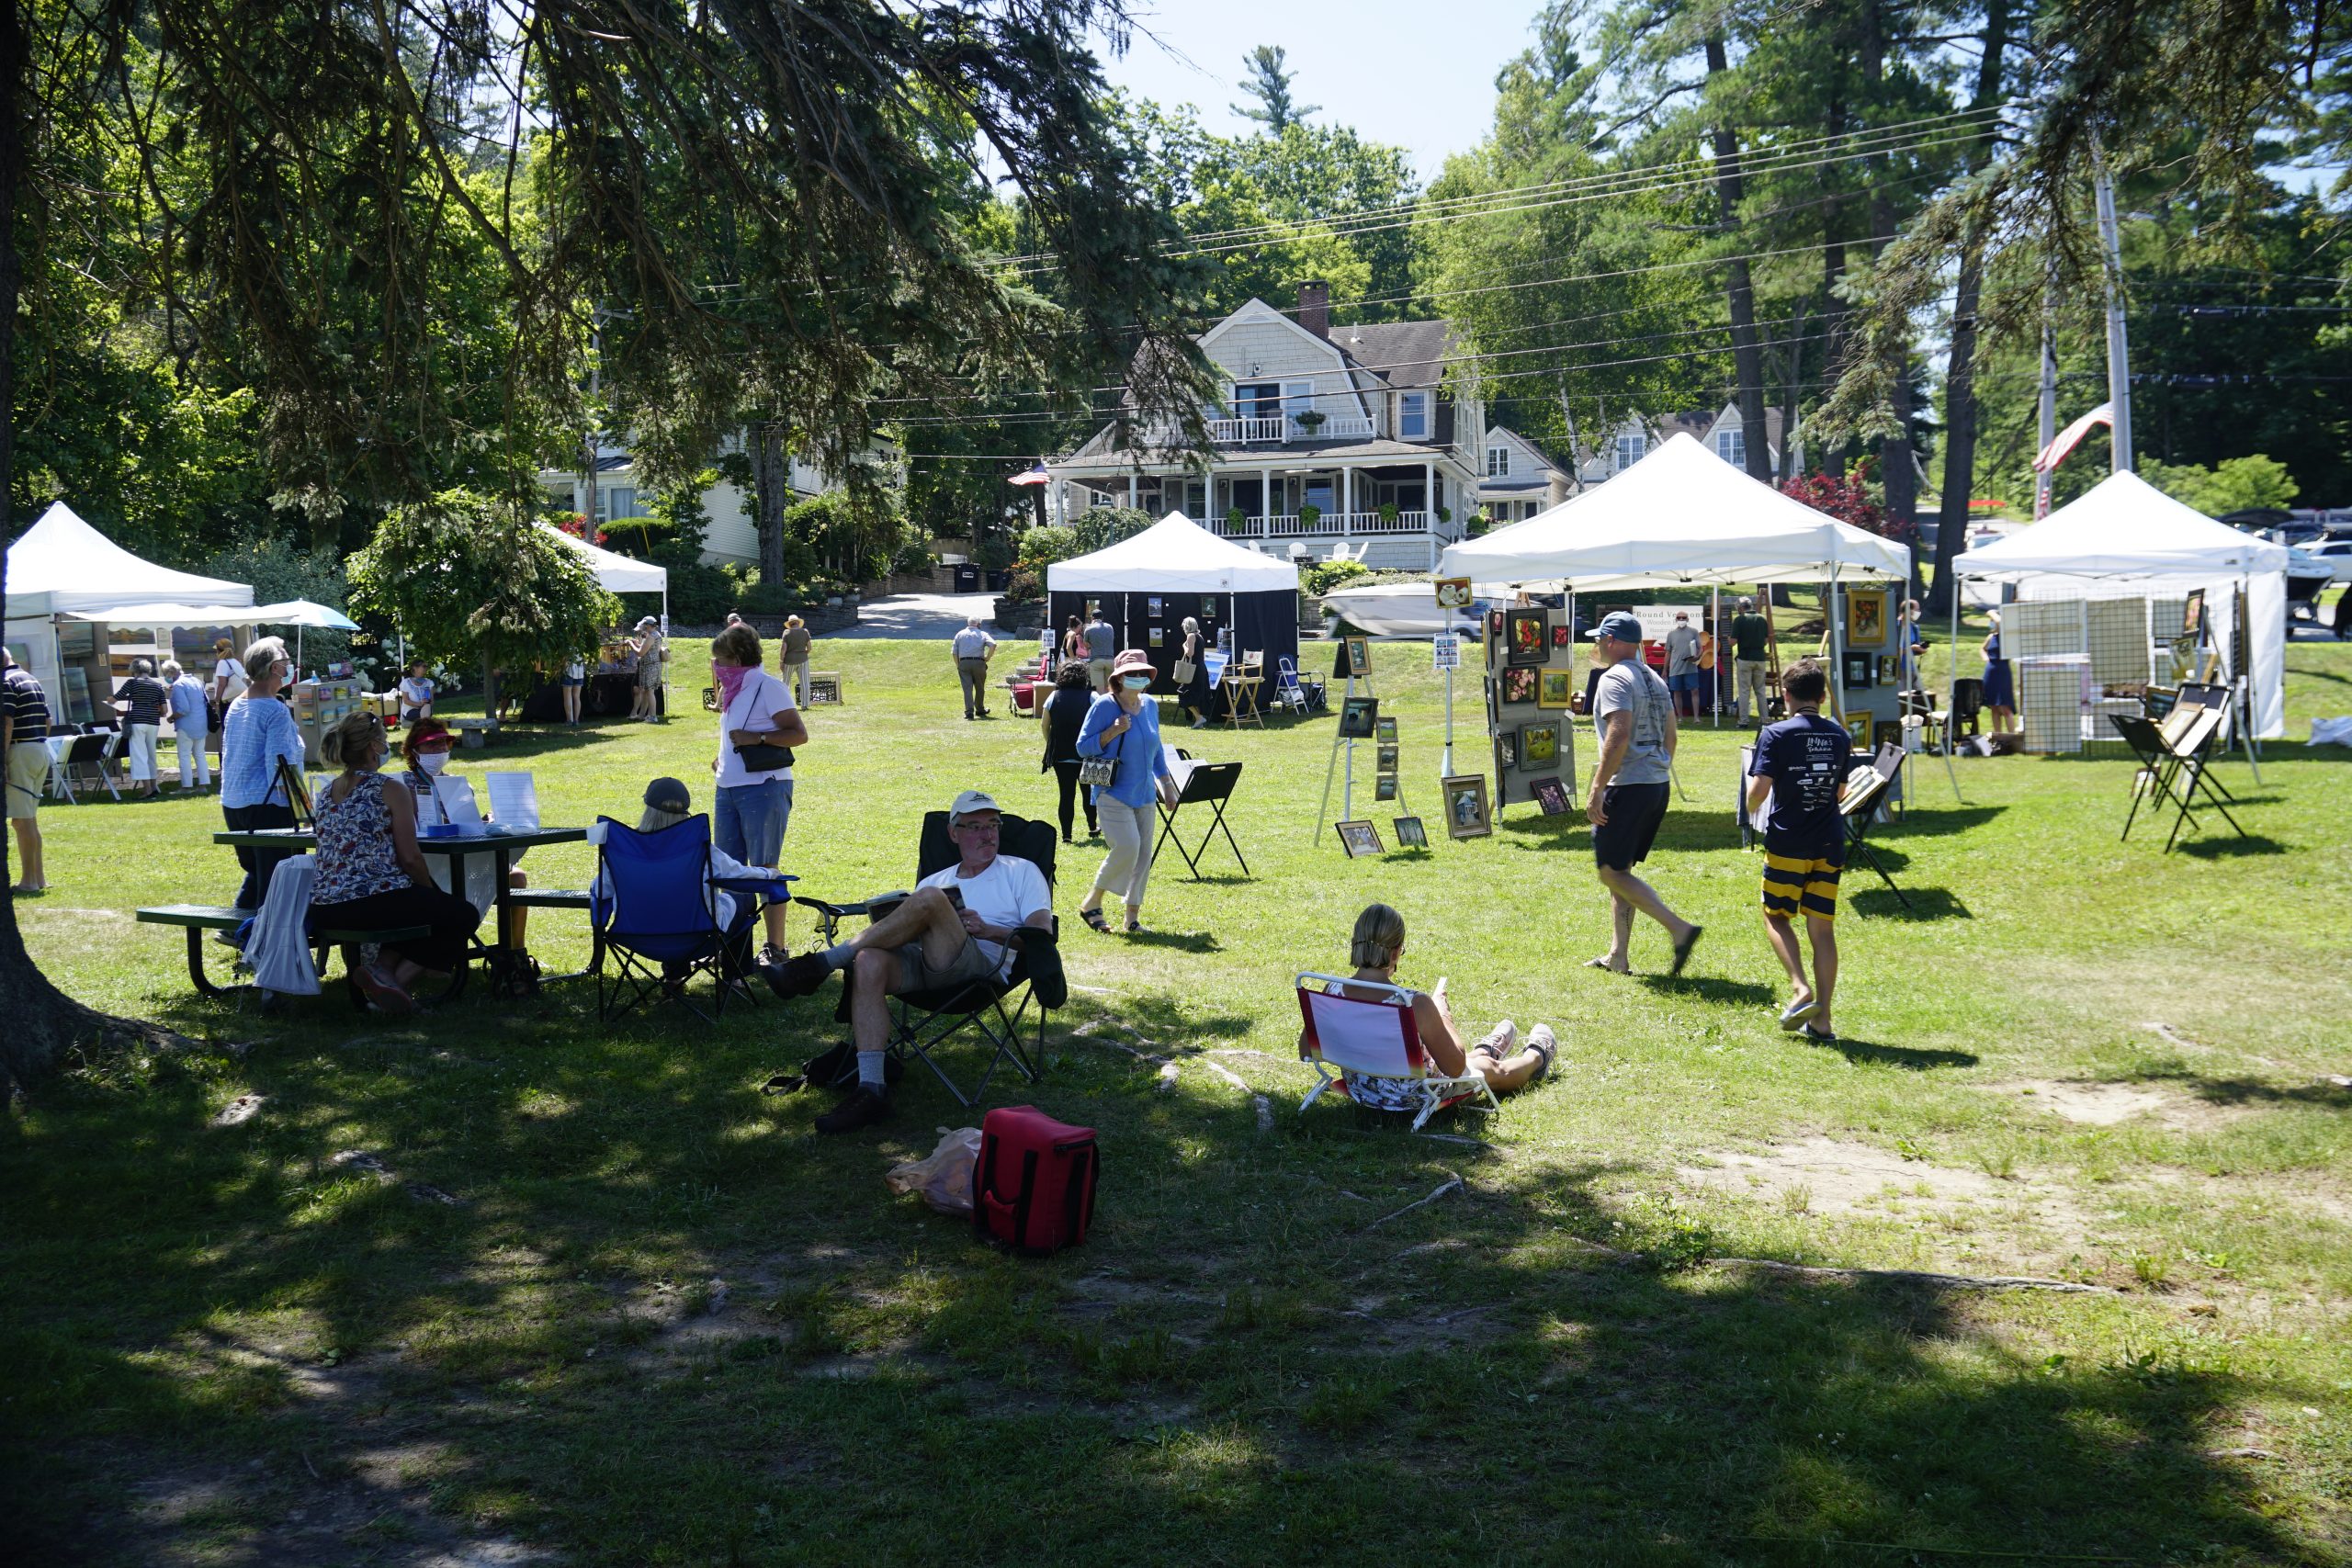 Shop for Beautiful Art at Arts on the Green in Sunapee Harbor The